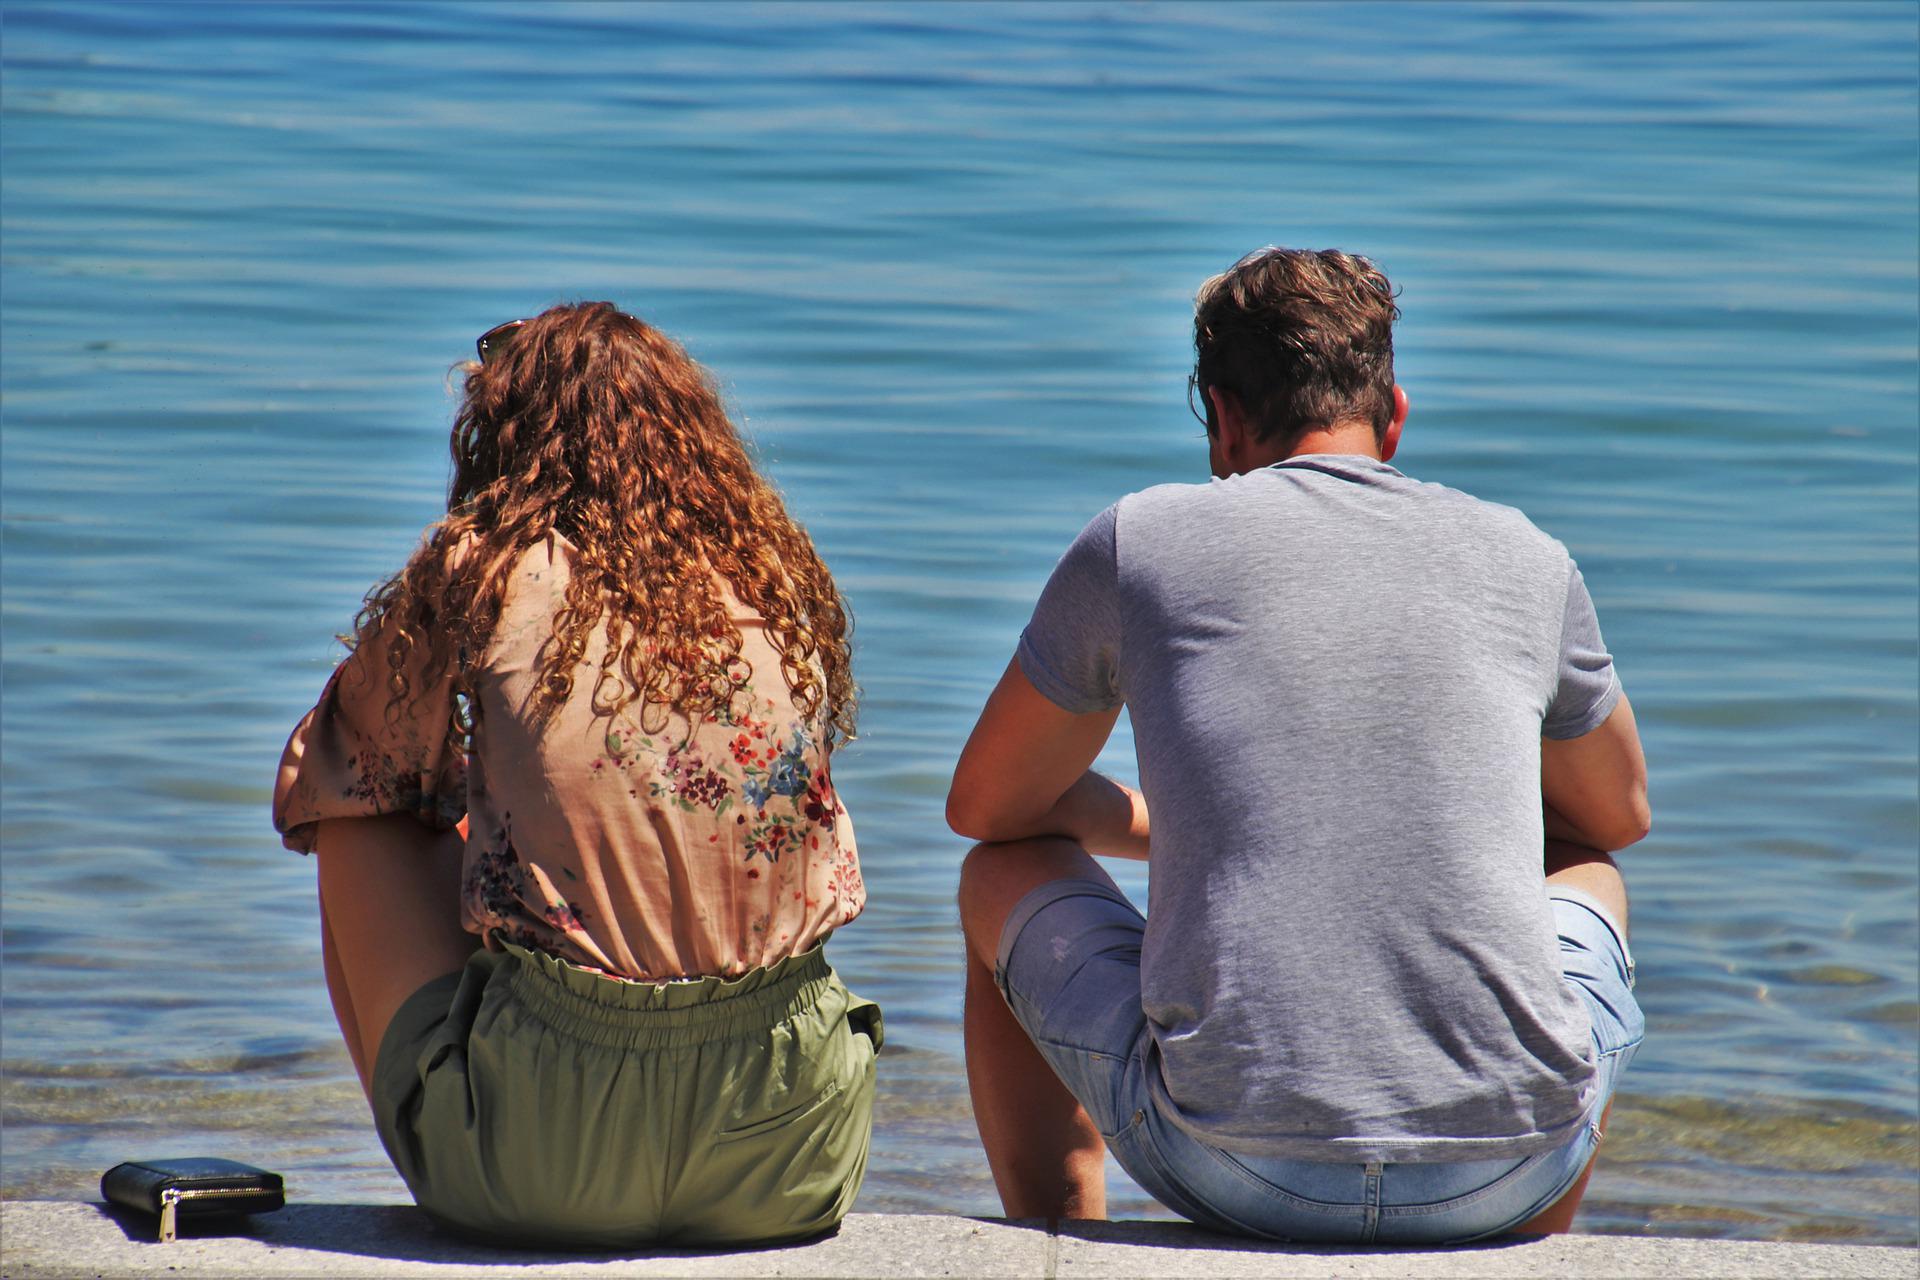 Couple sitting down next to each other on the beach seeming distant from one another or as if they had an argument.